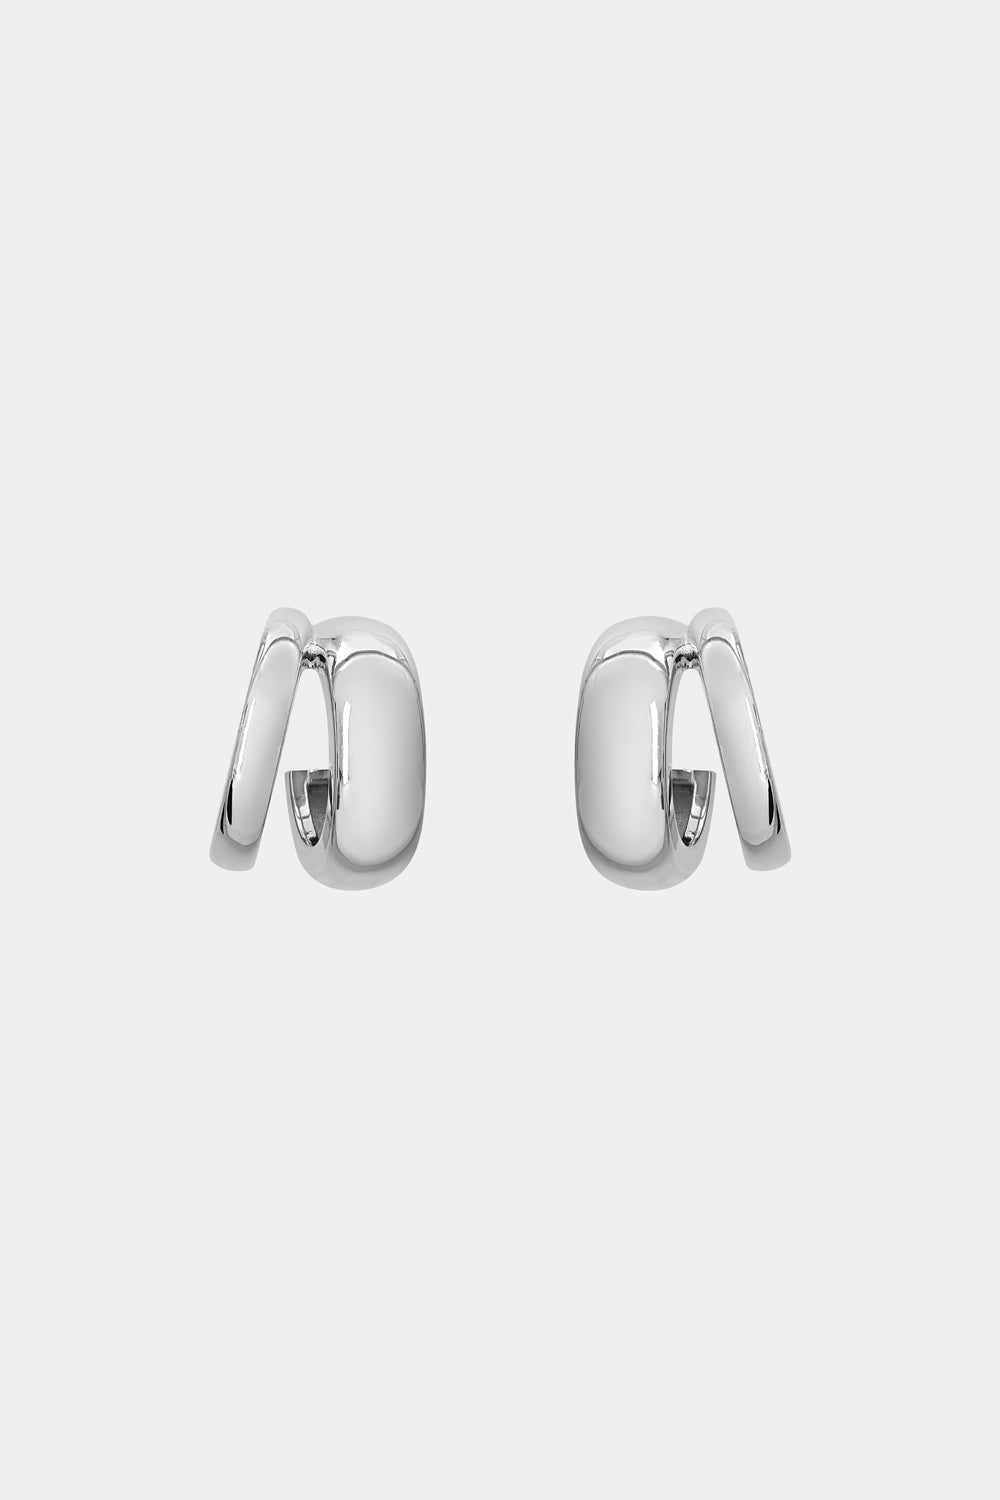 Sabine Hoops | Silver or 9K White Gold, More Options Available